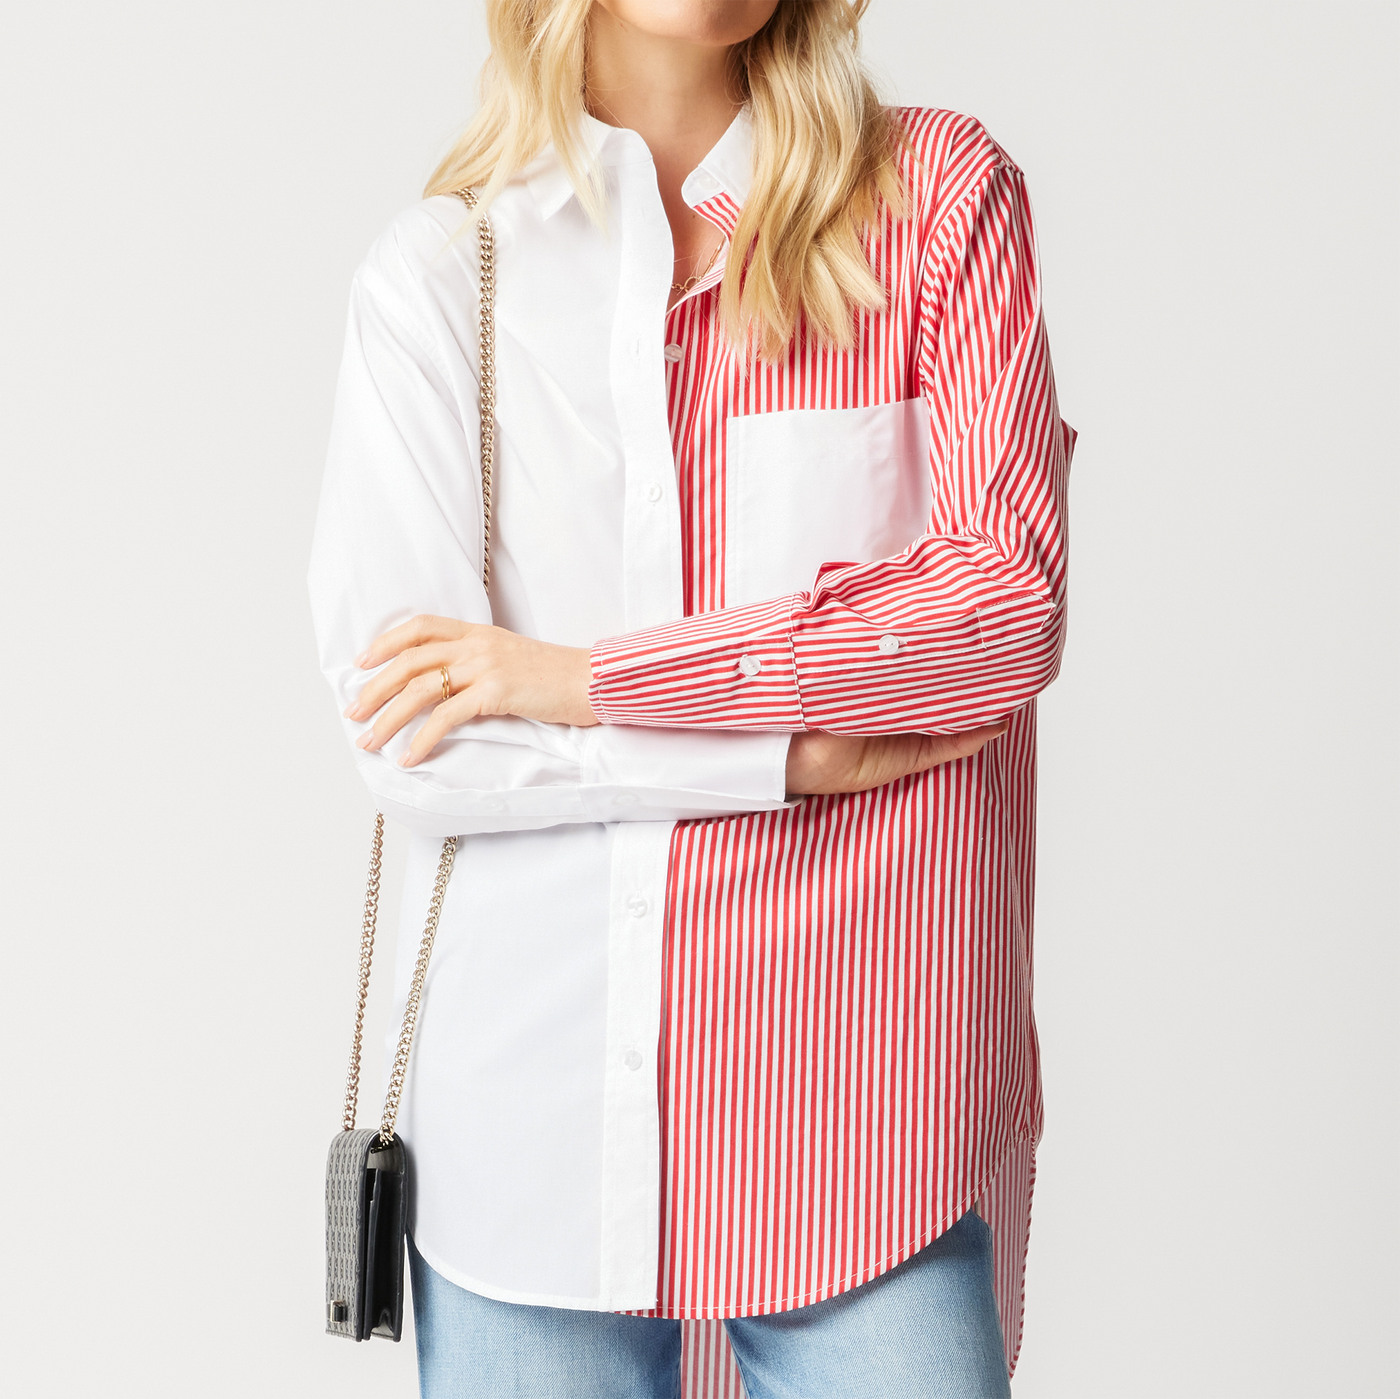 Top XS/S / Red The Brooklyn Button Down Katie Kime